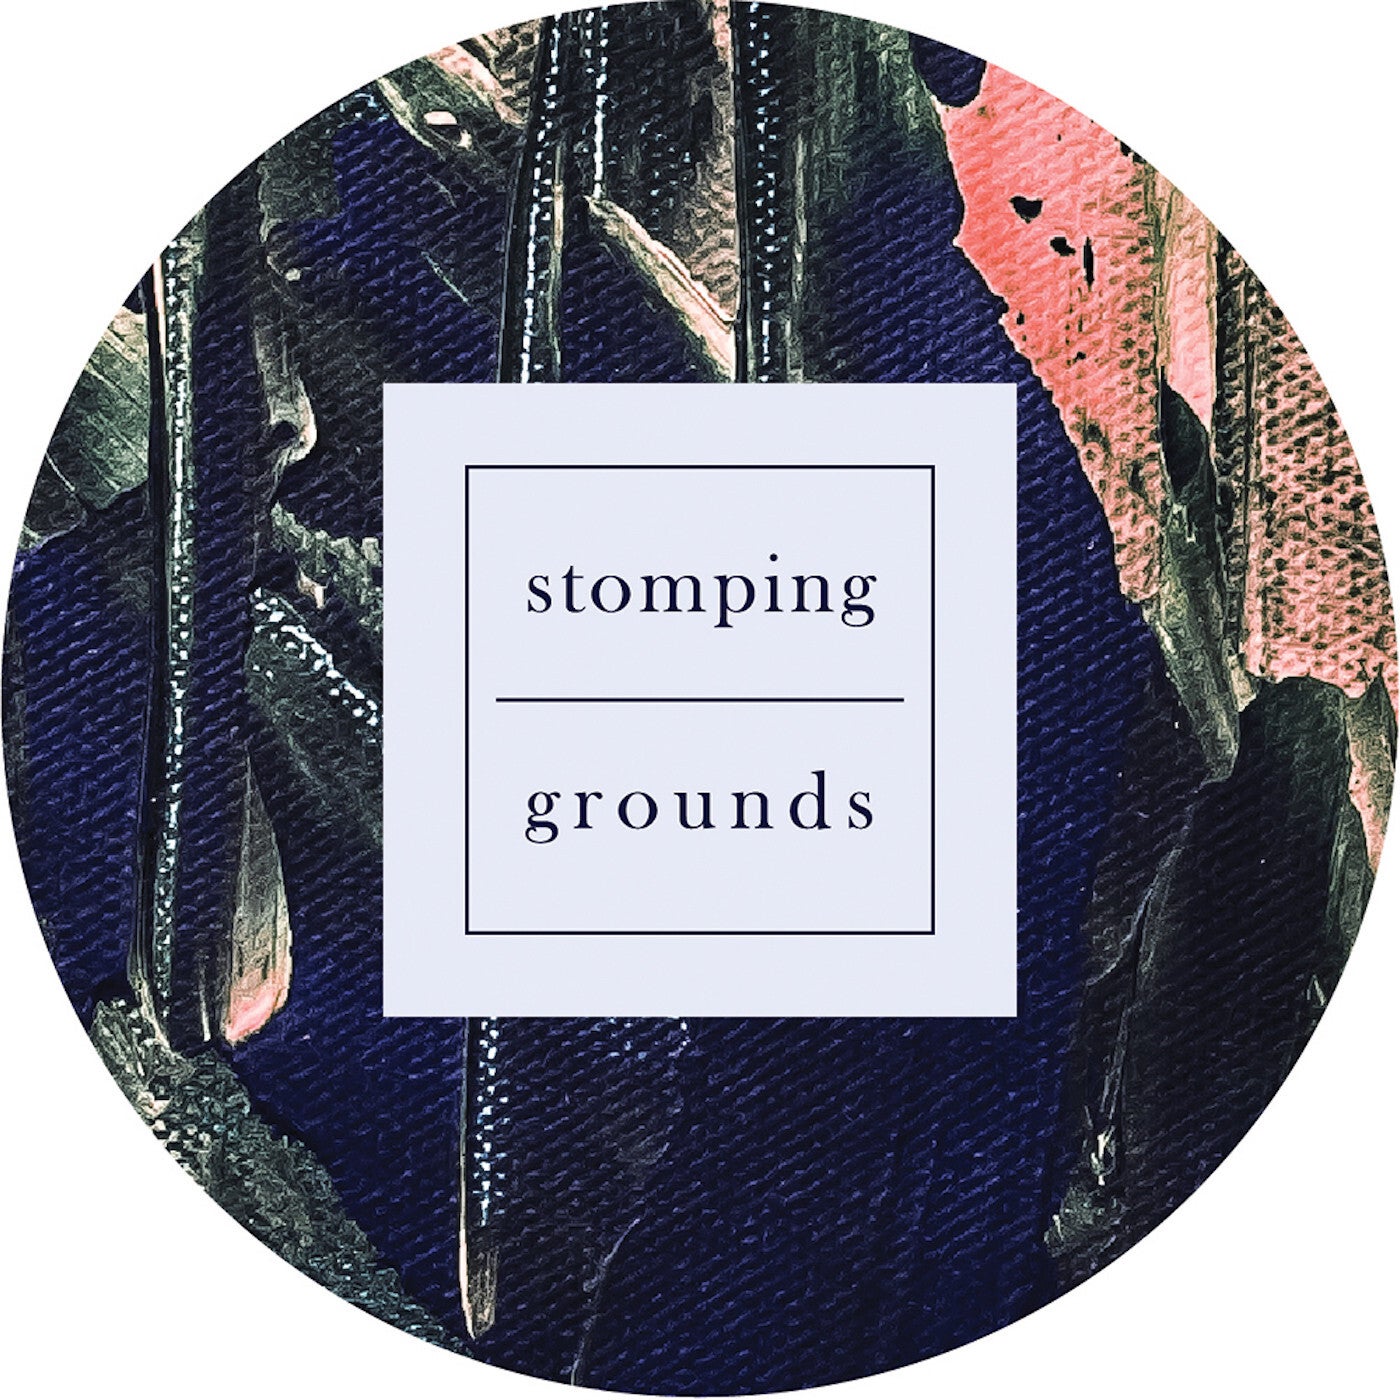 Stomping Grounds 001